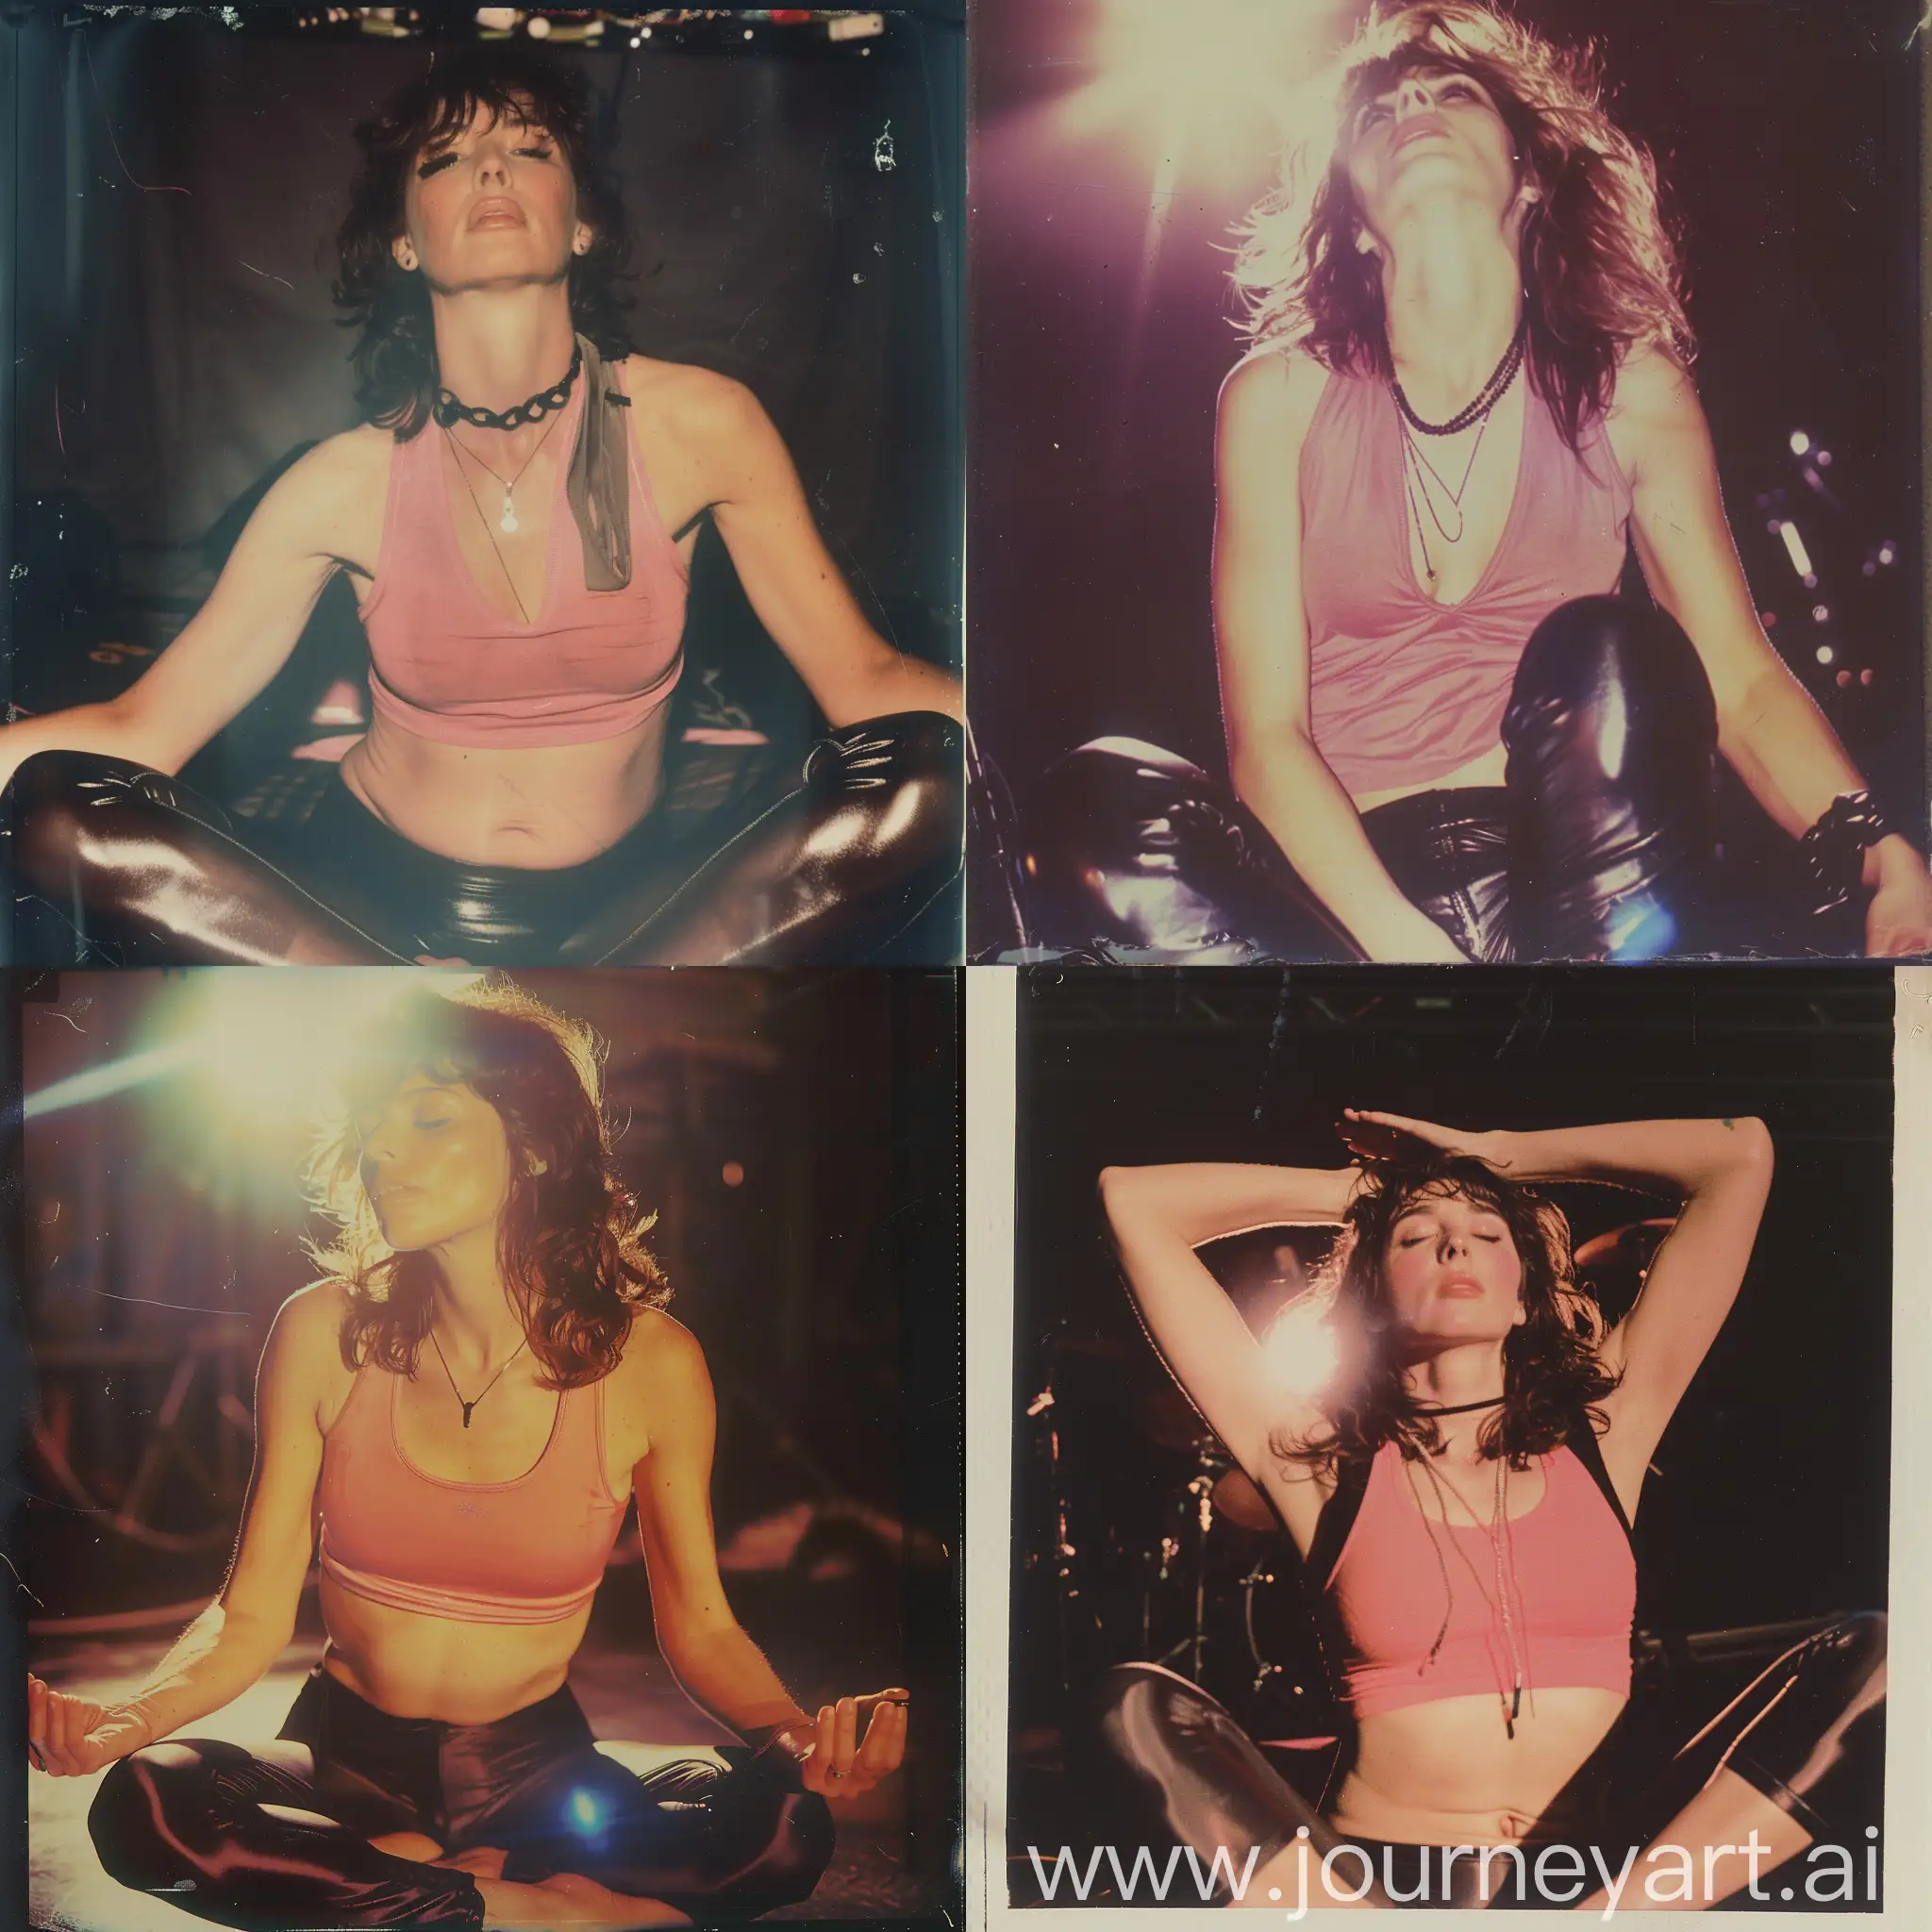 Macro closeup of Laura Branigan wearing a pink belly tanktop, and black leggings, while doing yoga on stage, 1983... flash on, vintage instant polaroid photo.